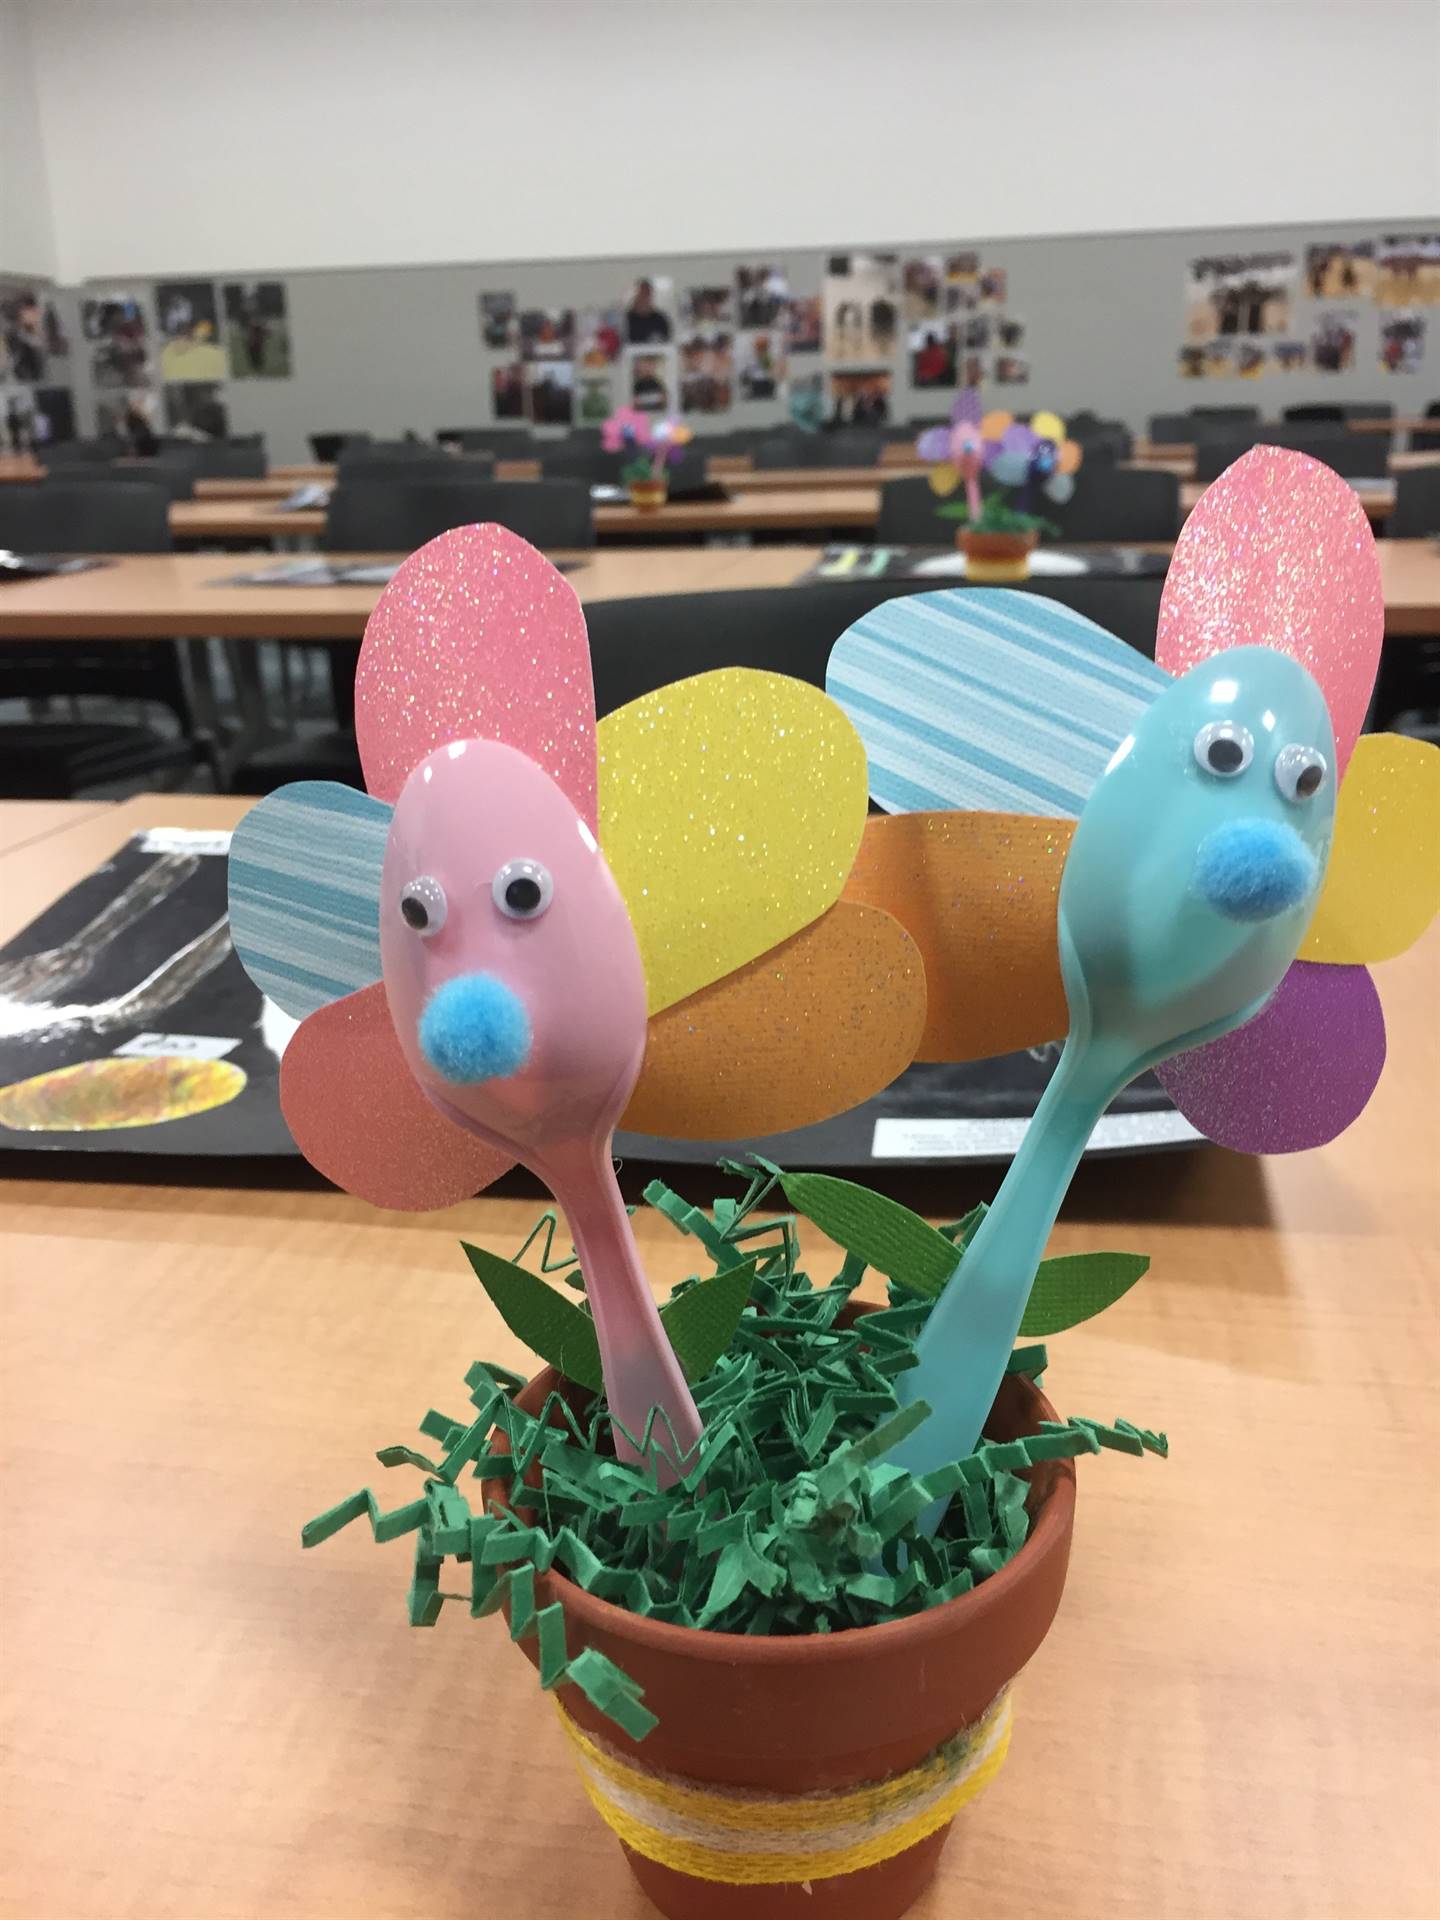 Kensington Students Created the Table Decorations